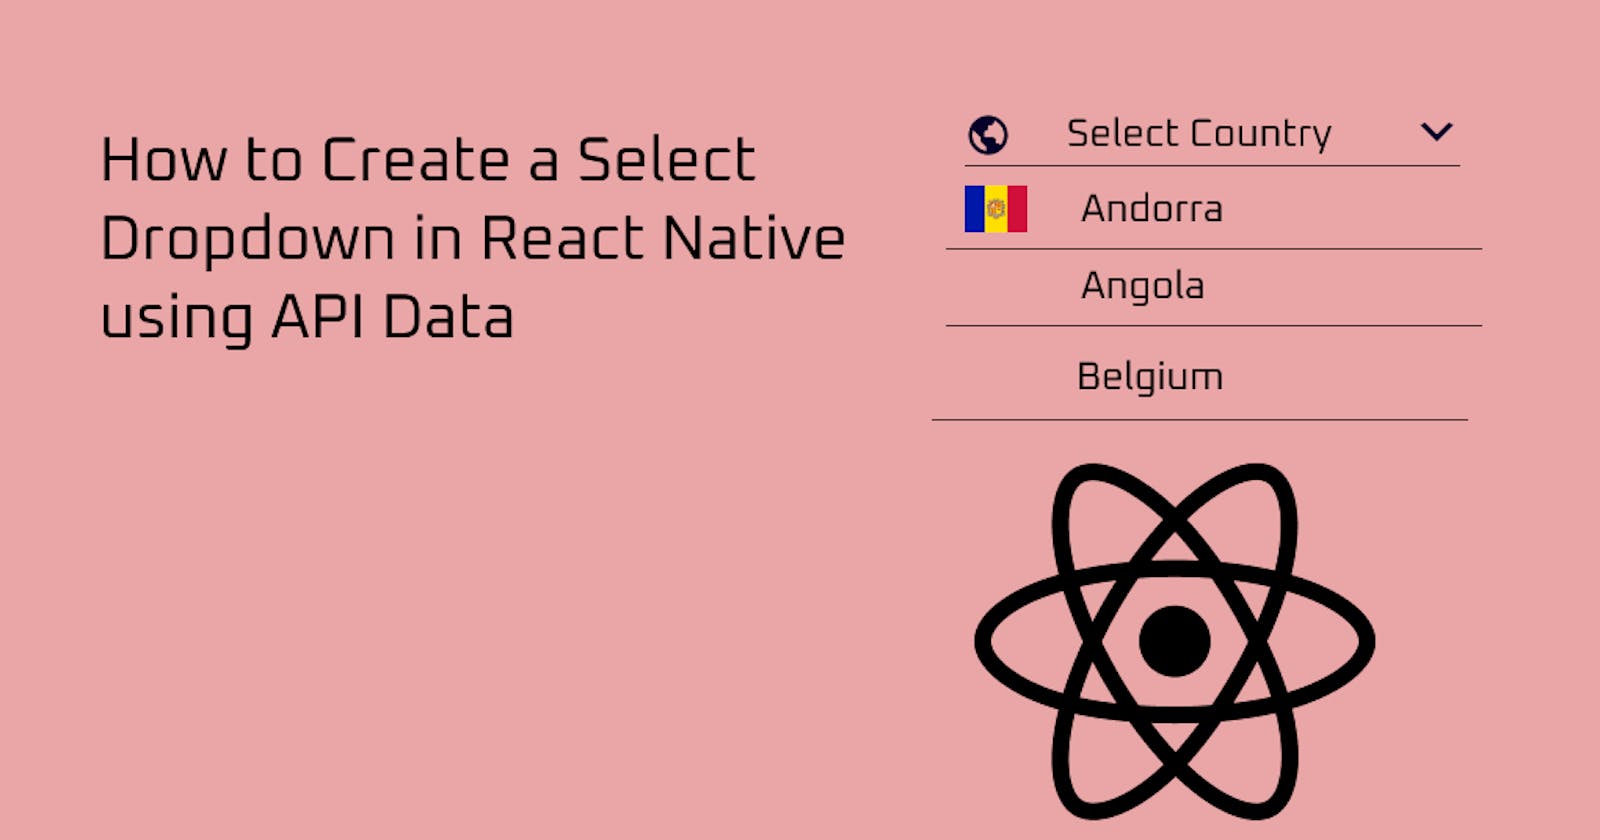 How to Create a Select Dropdown in React Native using API Data